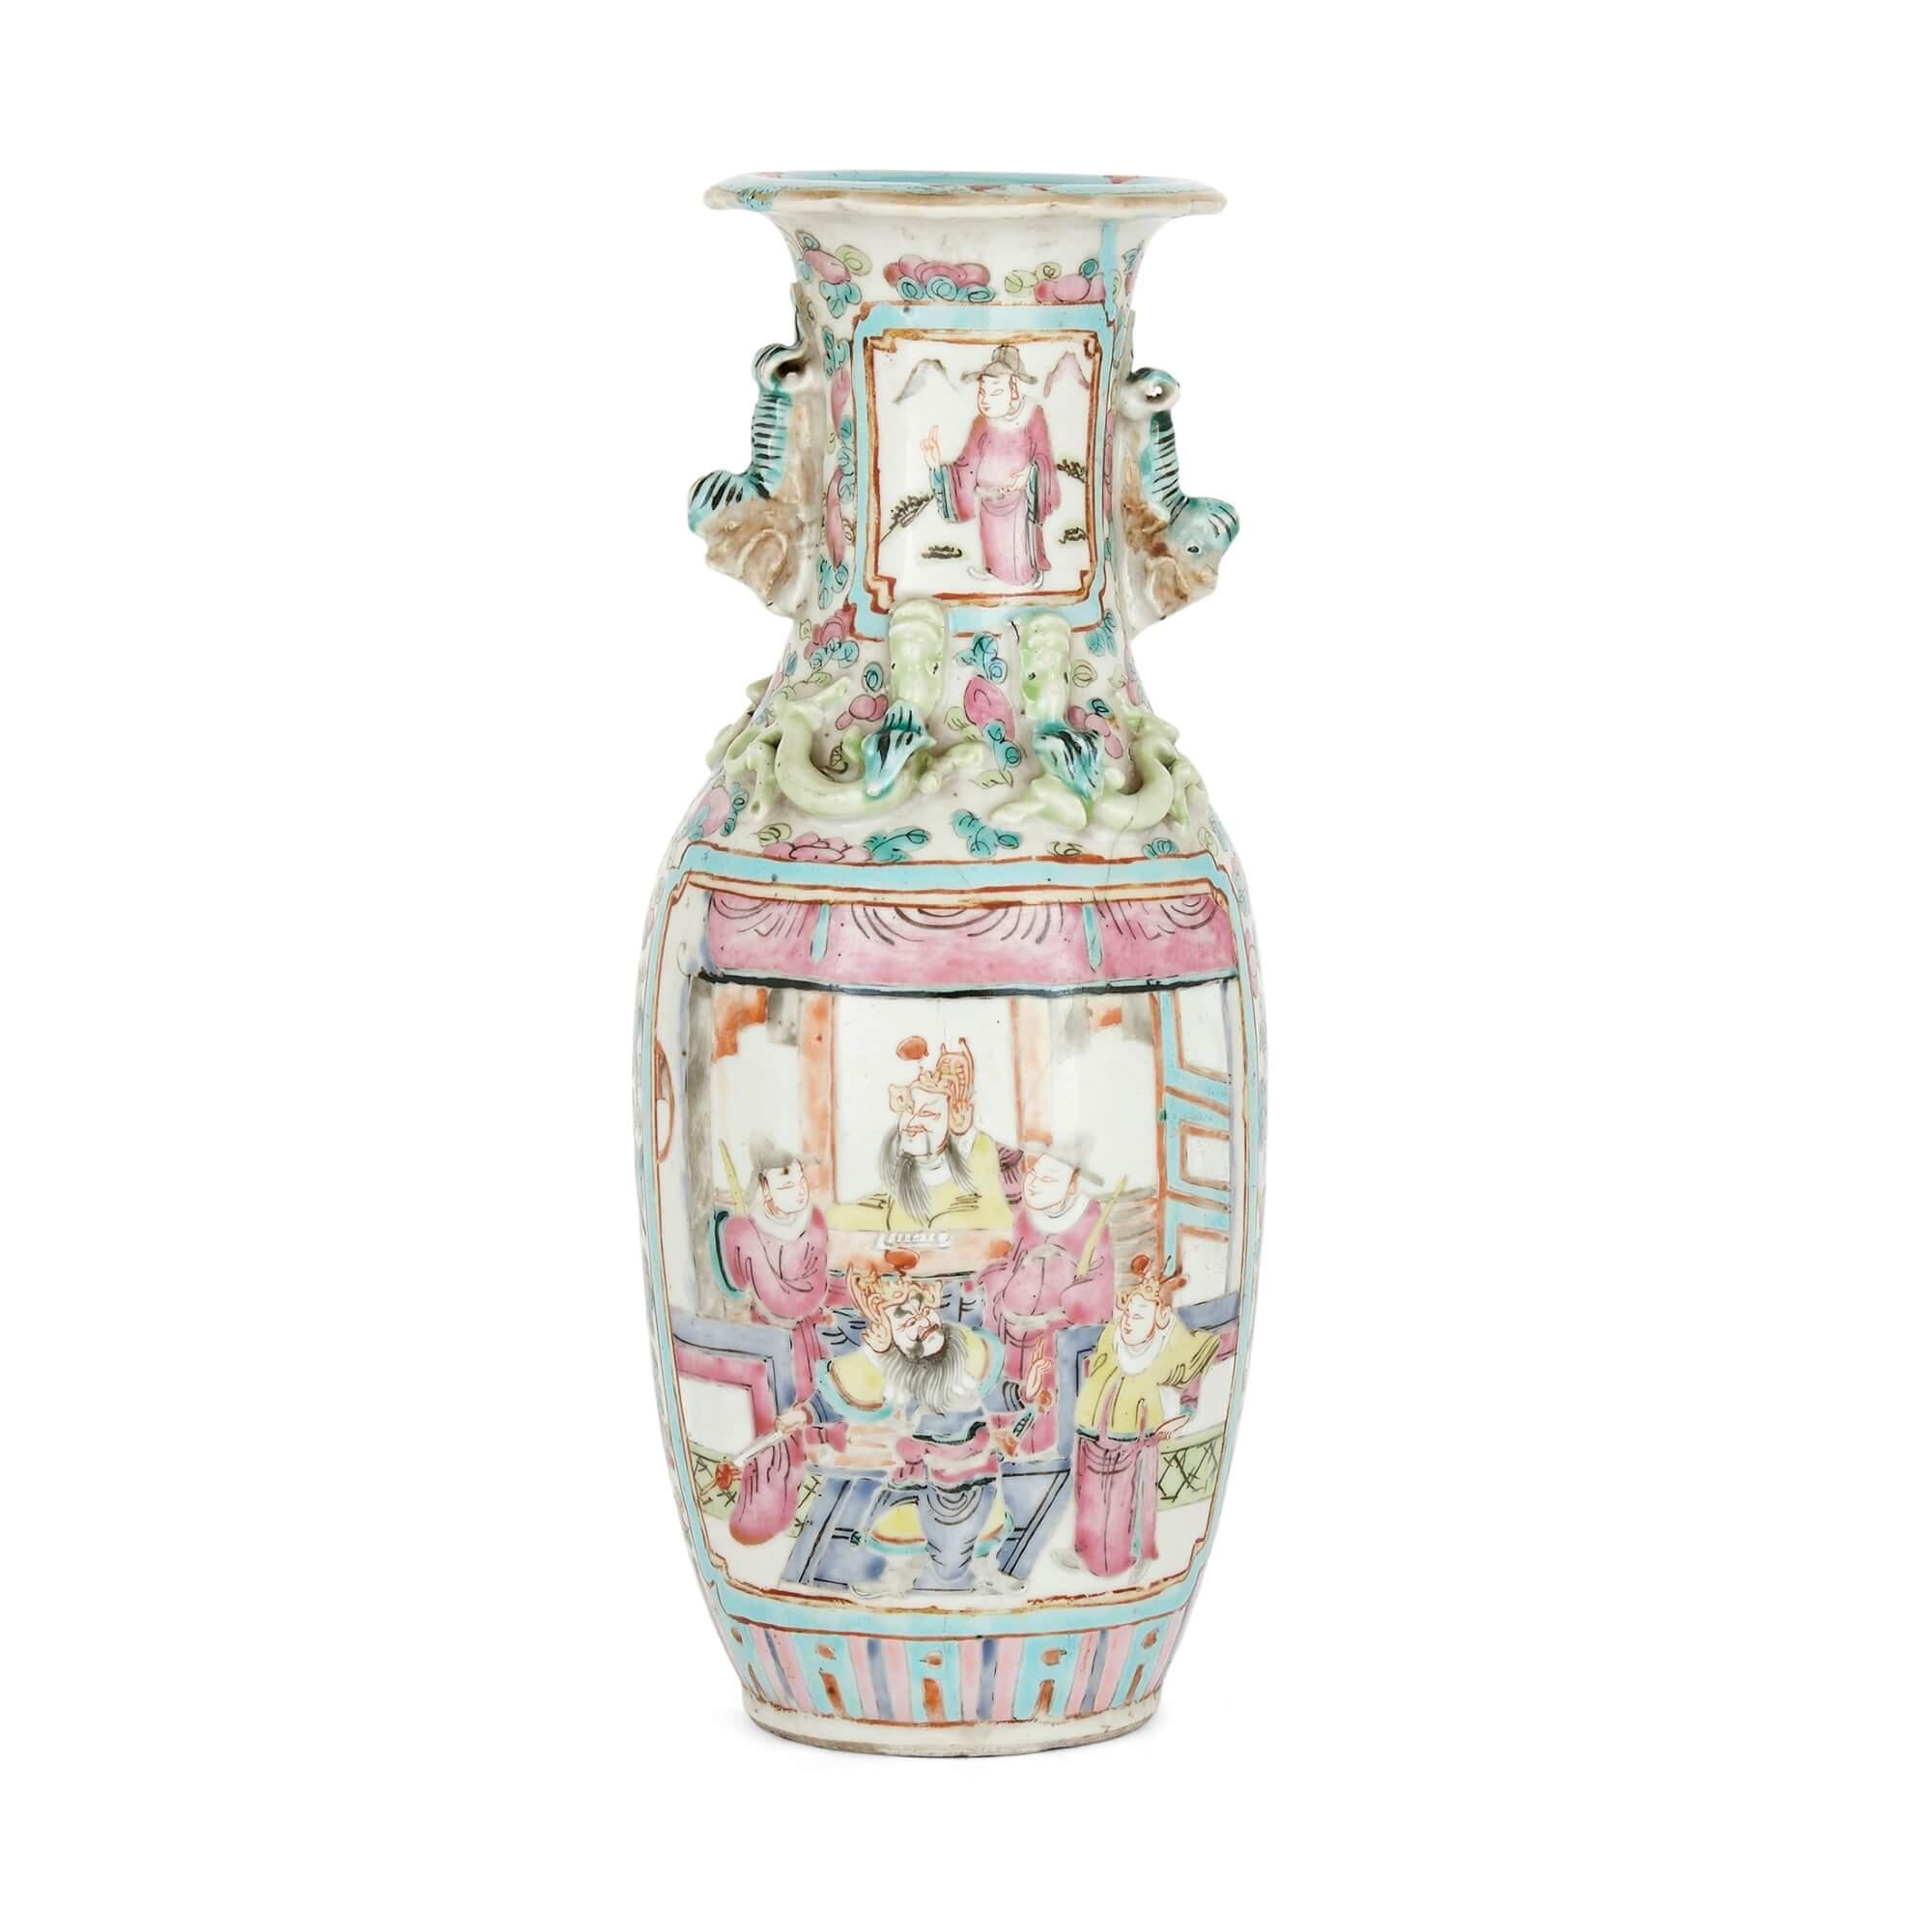 Antique Chinese Canton porcelain vase
Chinese, early 20th century
Measures: Height 24cm, diameter 10cm

This Canton porcelain vase has a fluted neck and is profusely decorated with hand-painted designs. On one side, a courtly interior scene sits